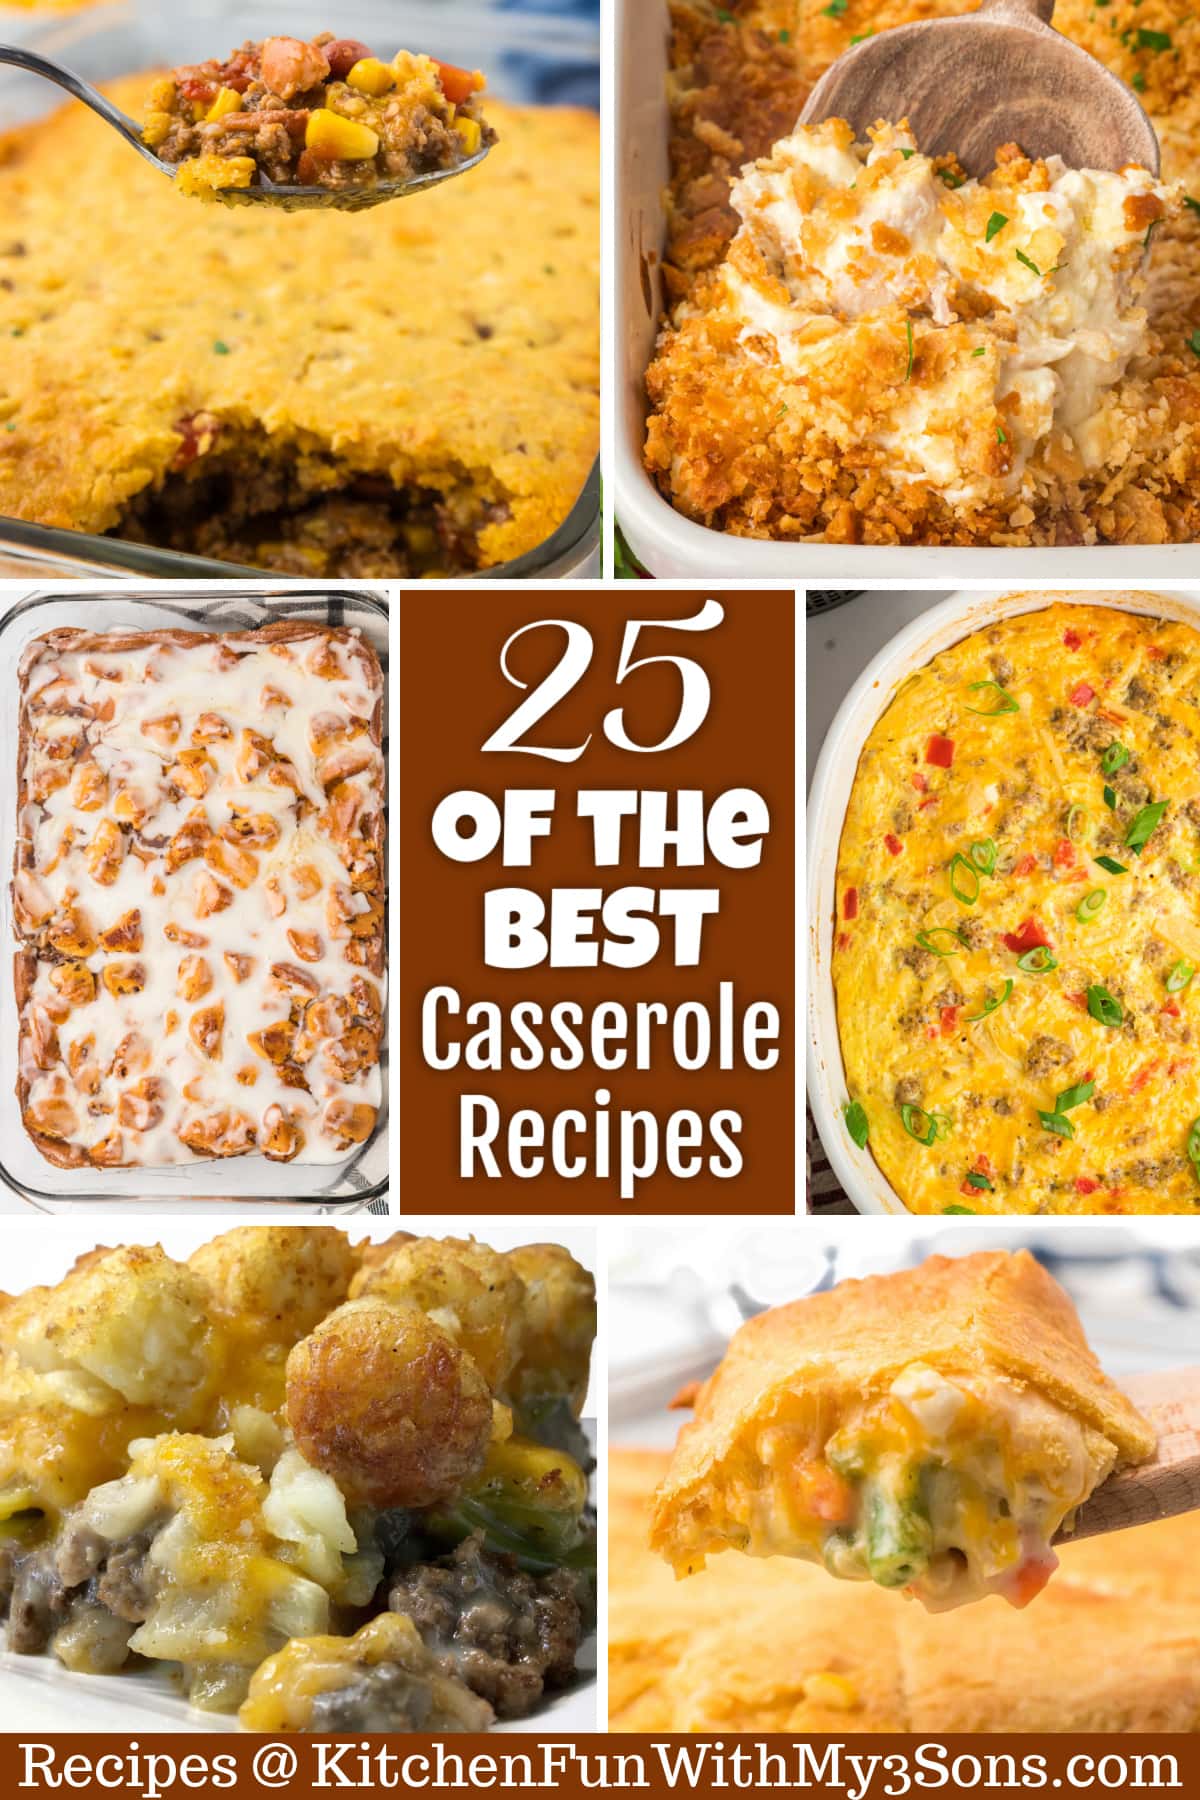 25 of the BEST Casserole Recipes pin